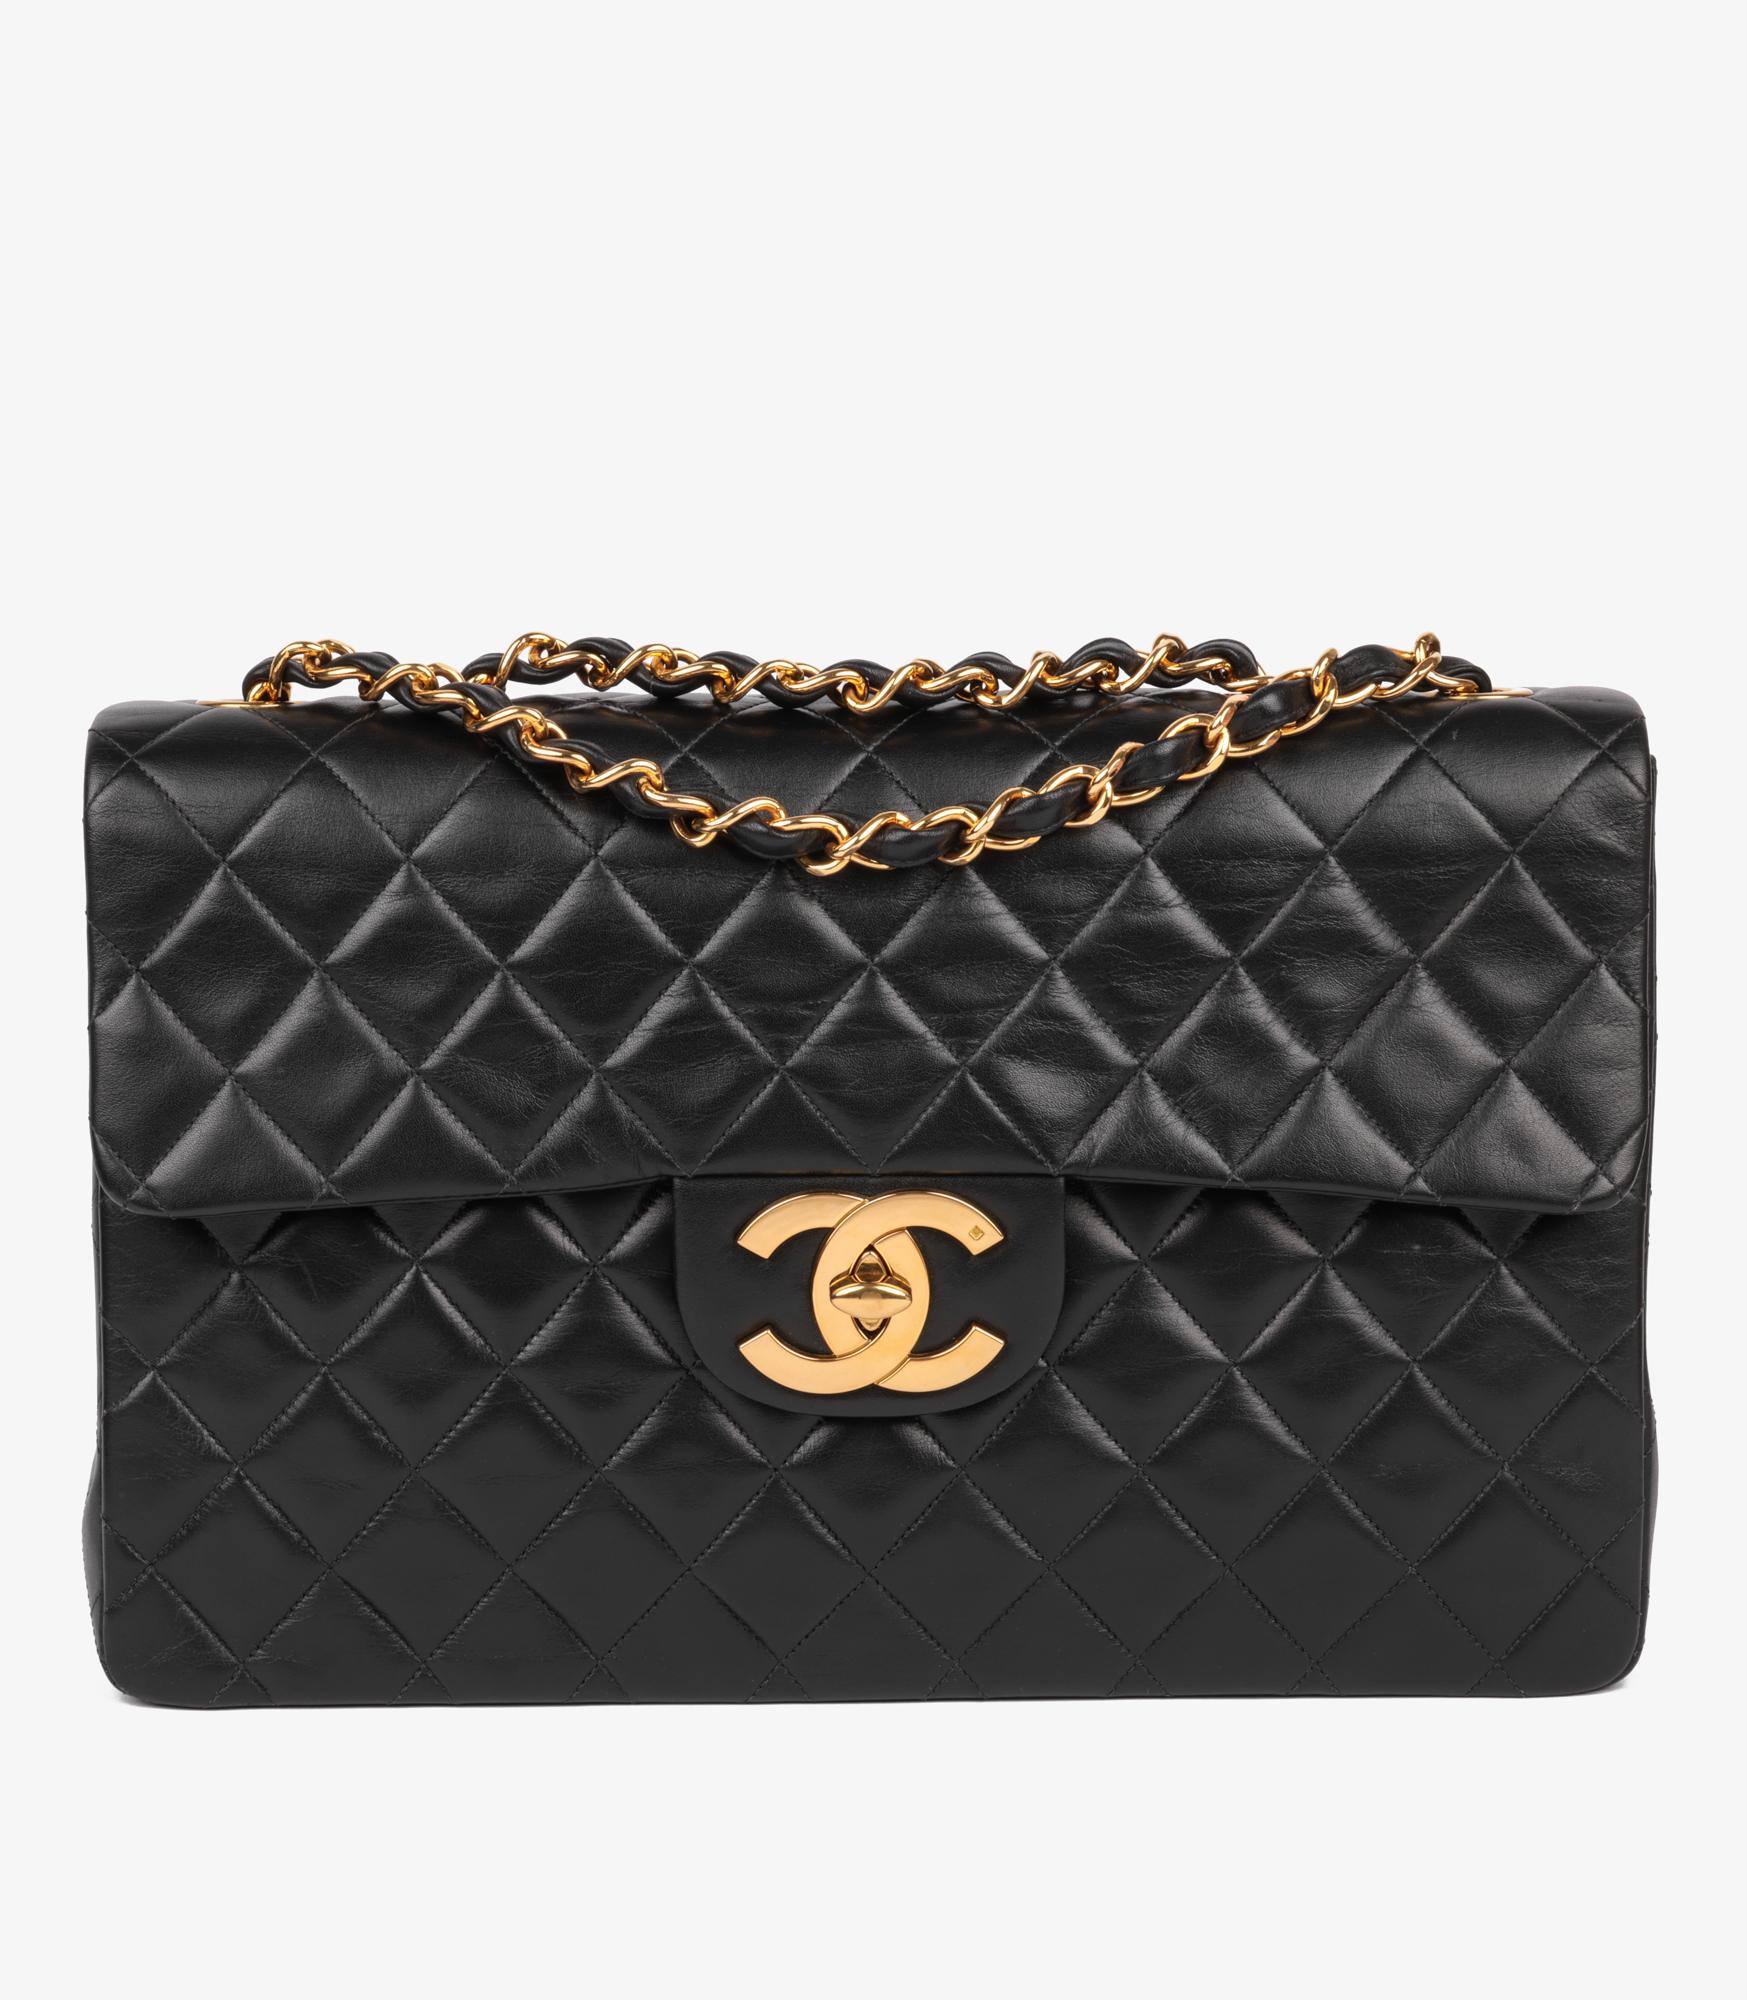 Chanel Black Quilted Lambskin Vintage Maxi Jumbo XL Flap Bag

Brand- Chanel
Model- Maxi Jumbo XL Classic Single Flap Bag
Product Type- Crossbody, Shoulder
Serial Number- 3115111
Age- Circa 1994
Accompanied By- Chanel Dust Bag, Care Booklet,